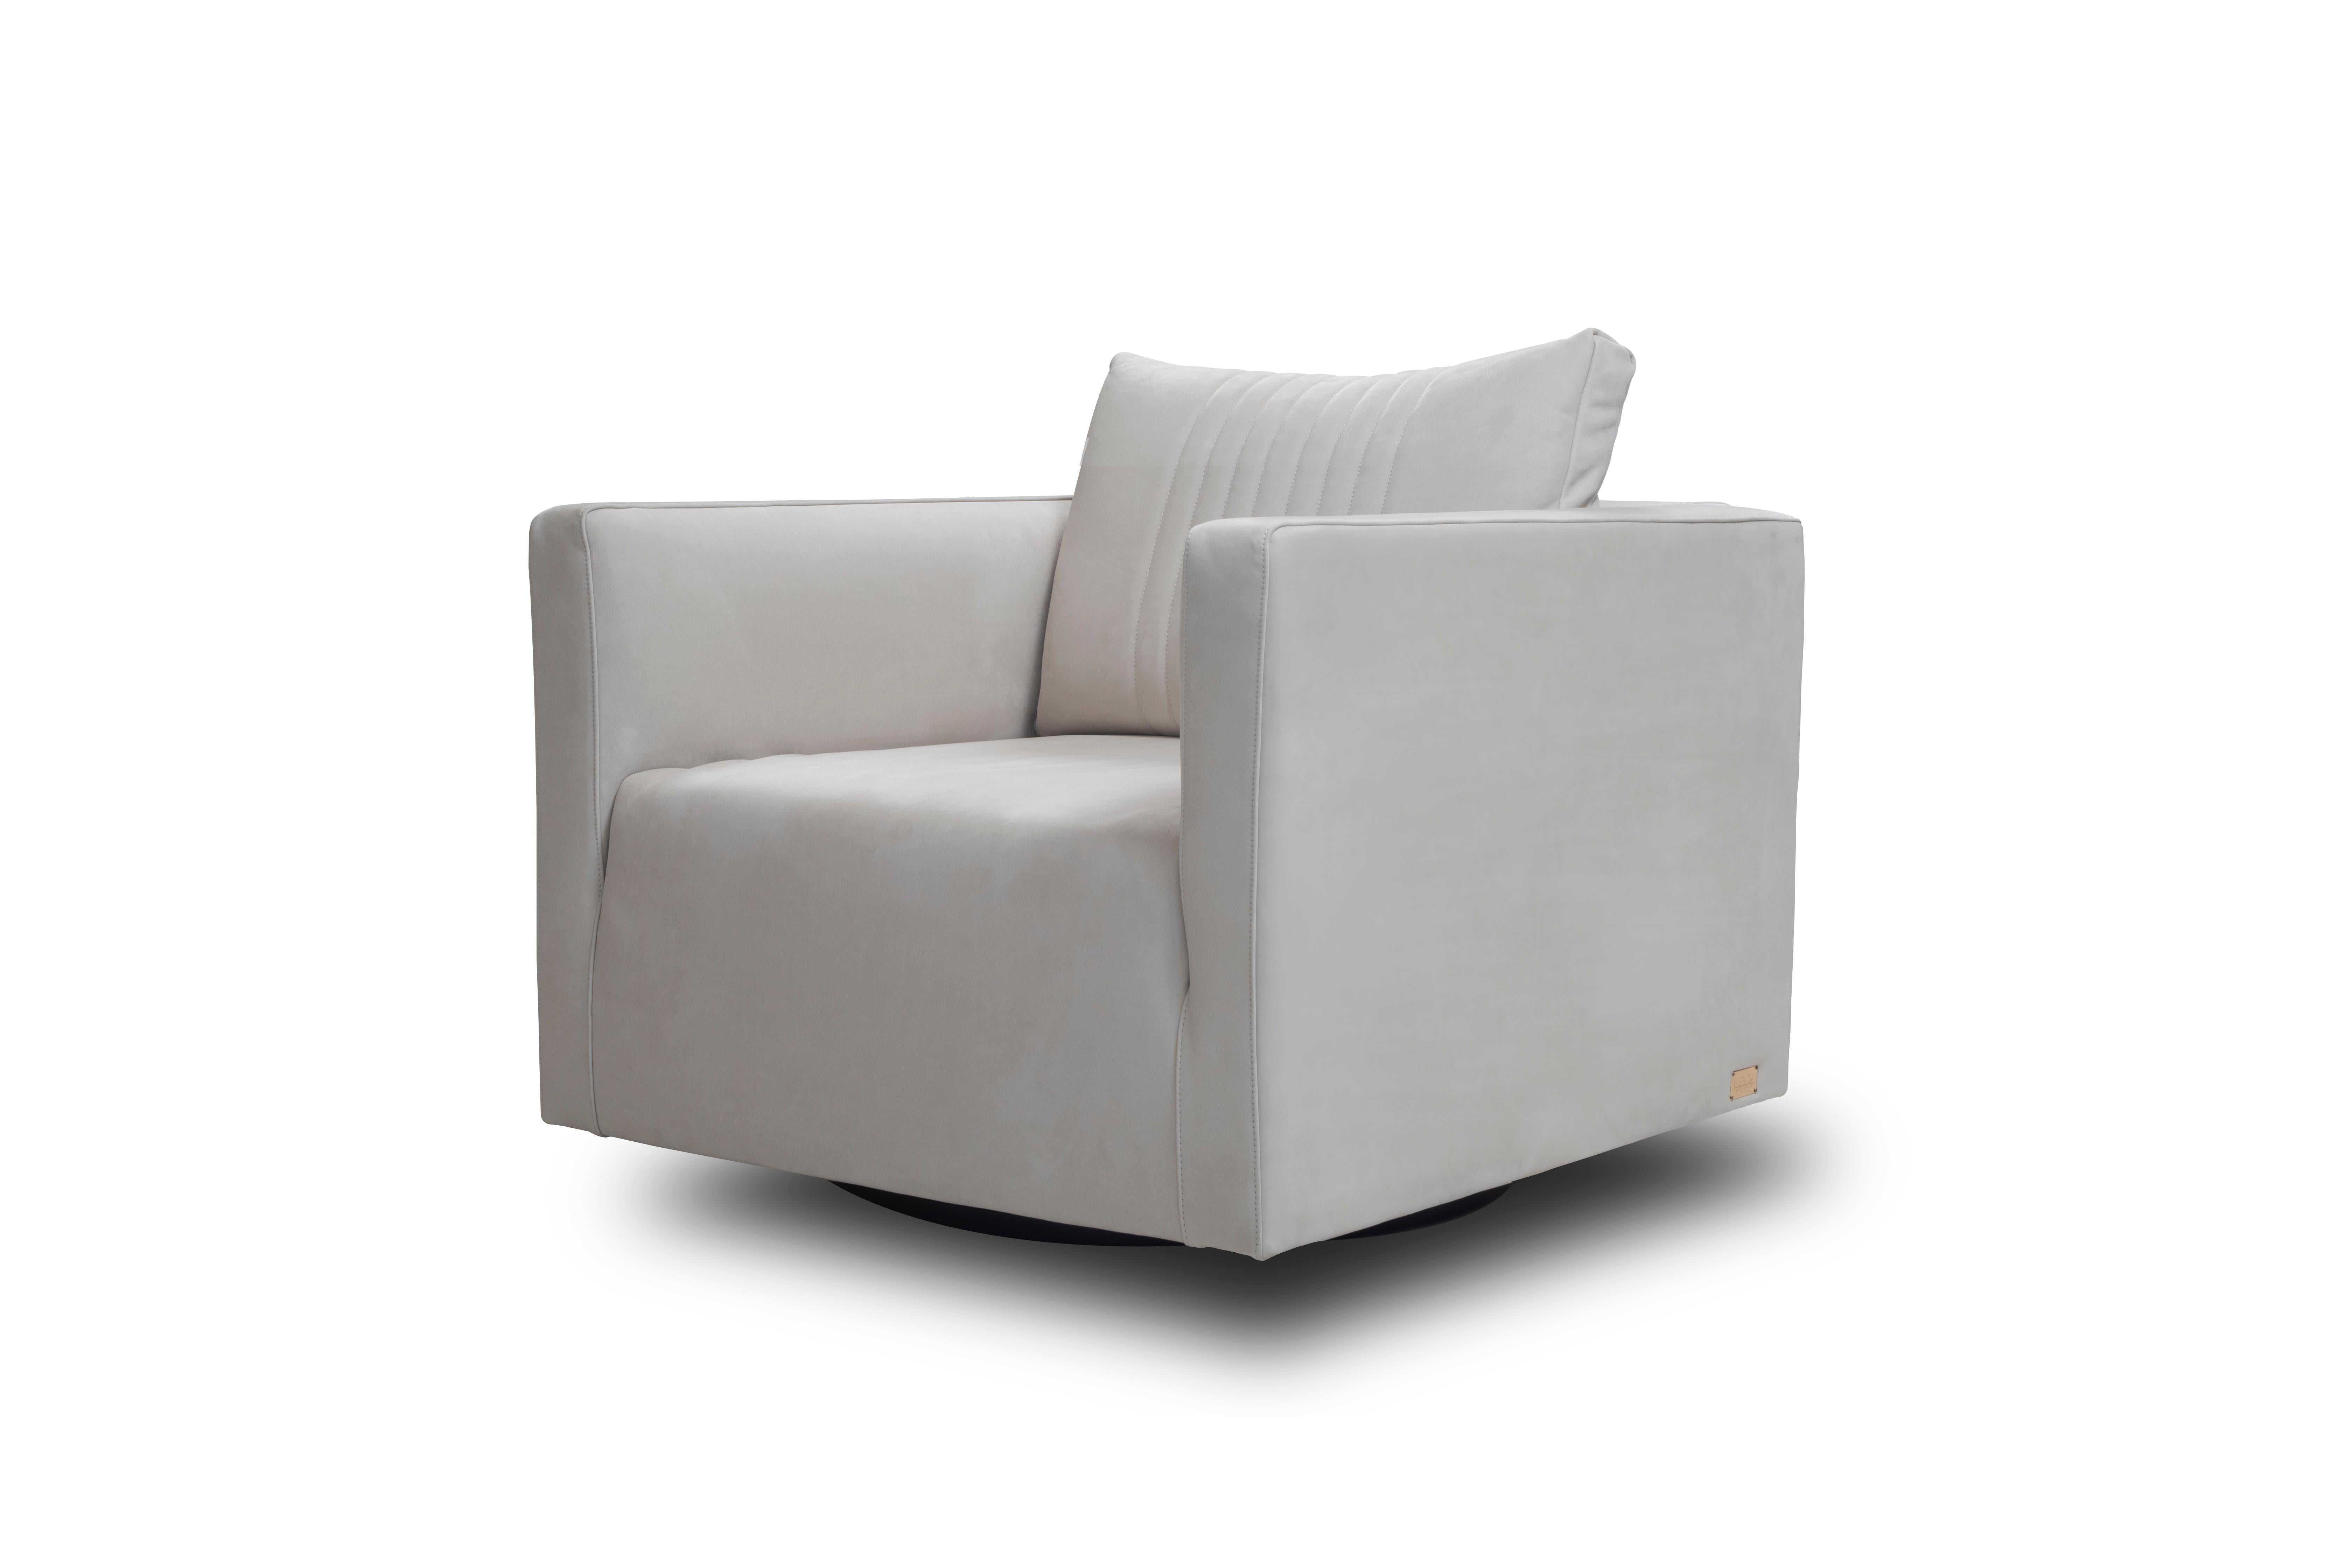 The Dado Royal modern armchair elevates its cubic shape with a subtle upholstery detail culminating in a noble metal accent bar in its back. The “petit” proportions resting on a swivel base combined with a soft down-padded seat make it a flexible,